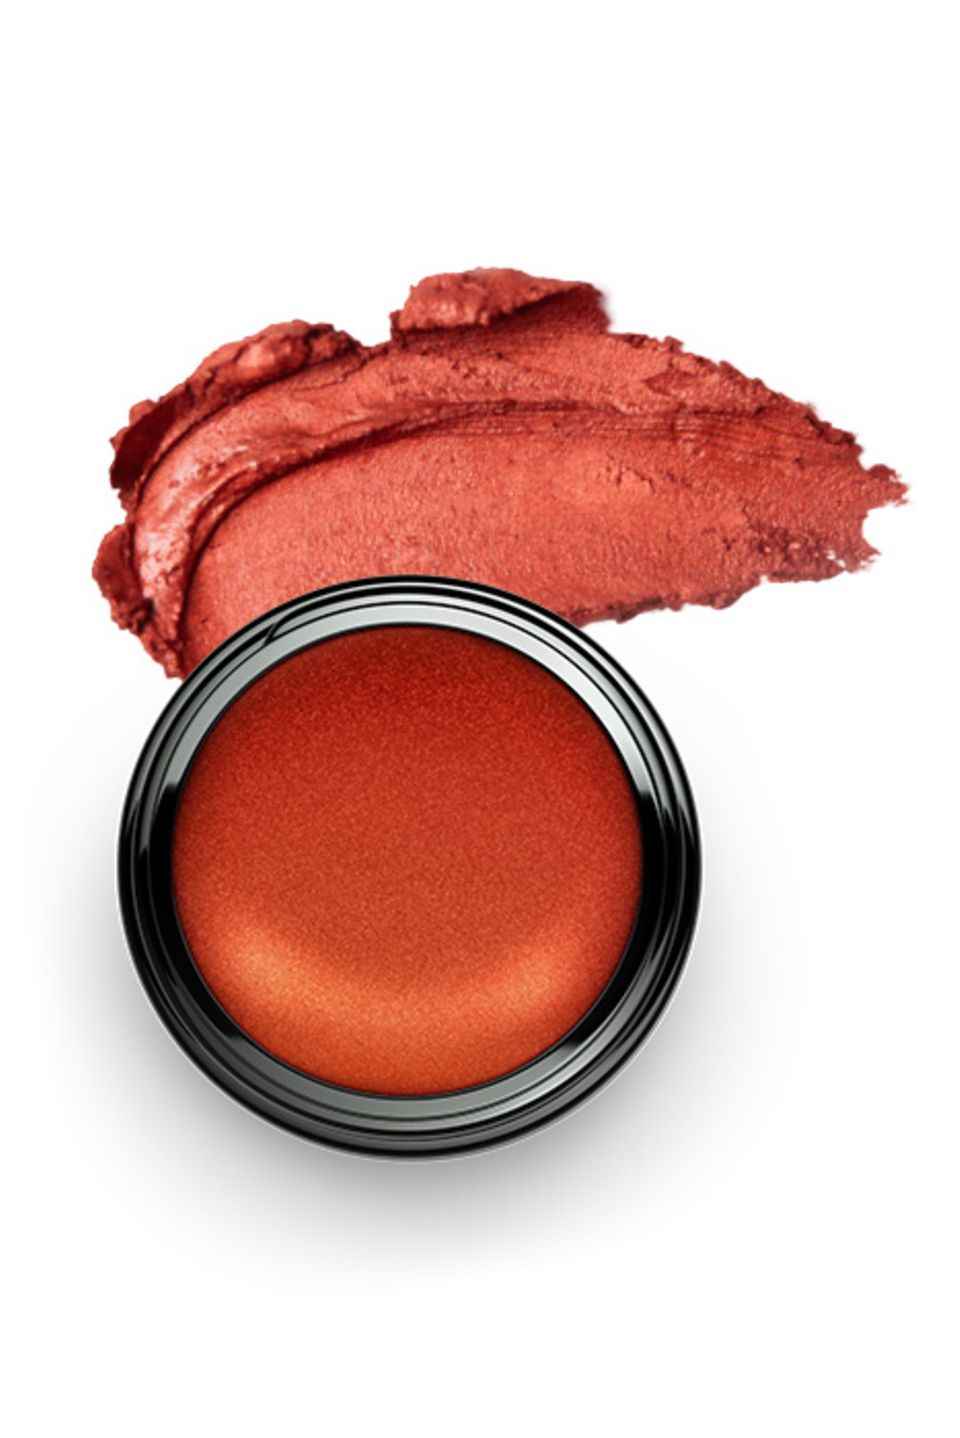 Autumnal copper tone for lips, eyes, cheeks